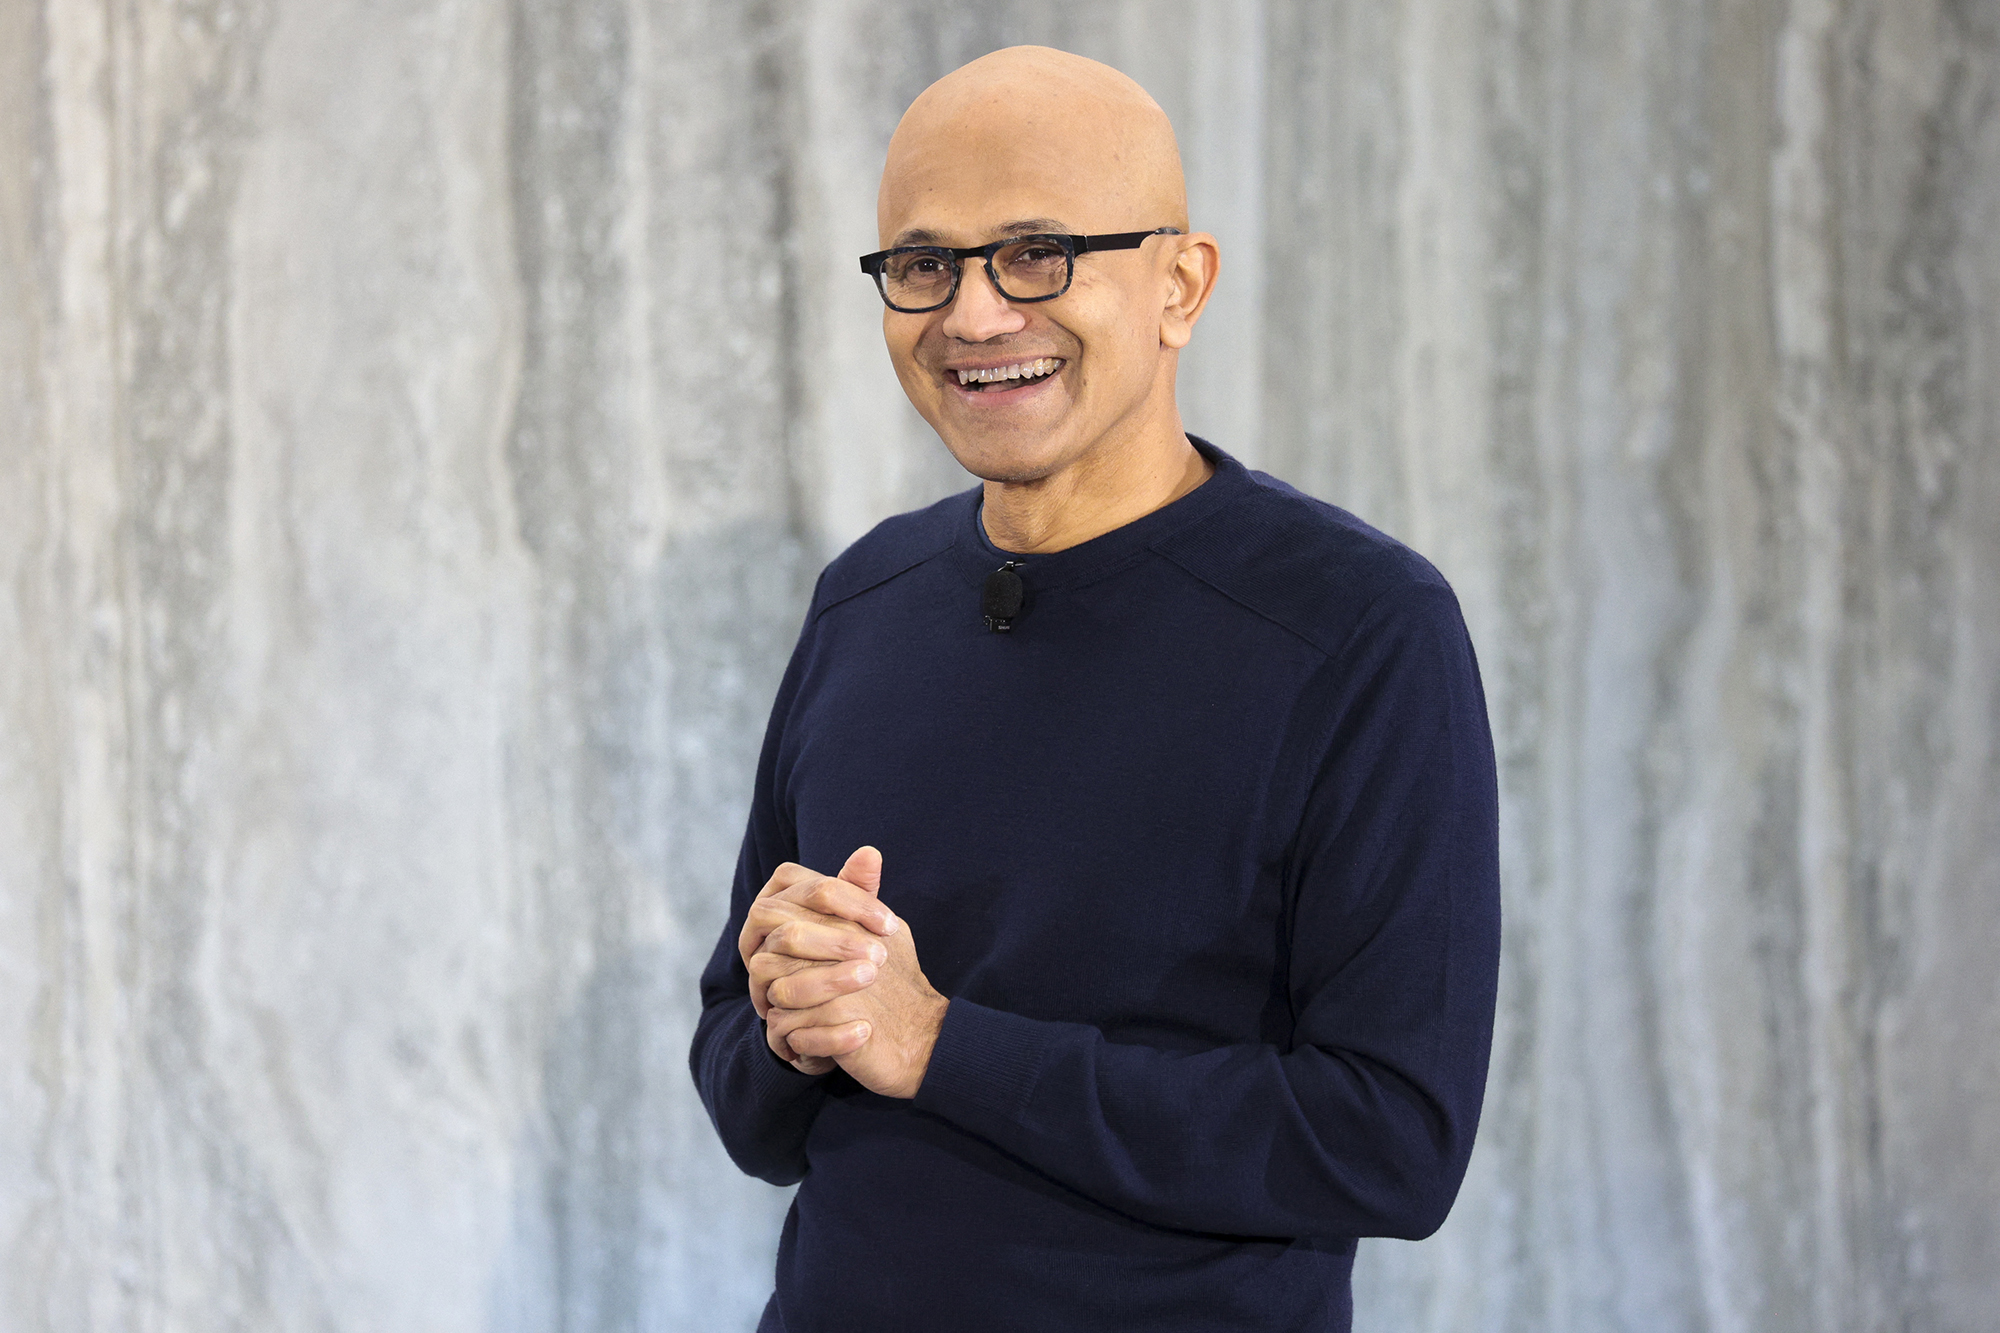 Microsoft CEO Satya Nadella speaks during a keynote address announcing ChatGPT integration for Bing at Microsoft in Redmond, Washington, on February 7.